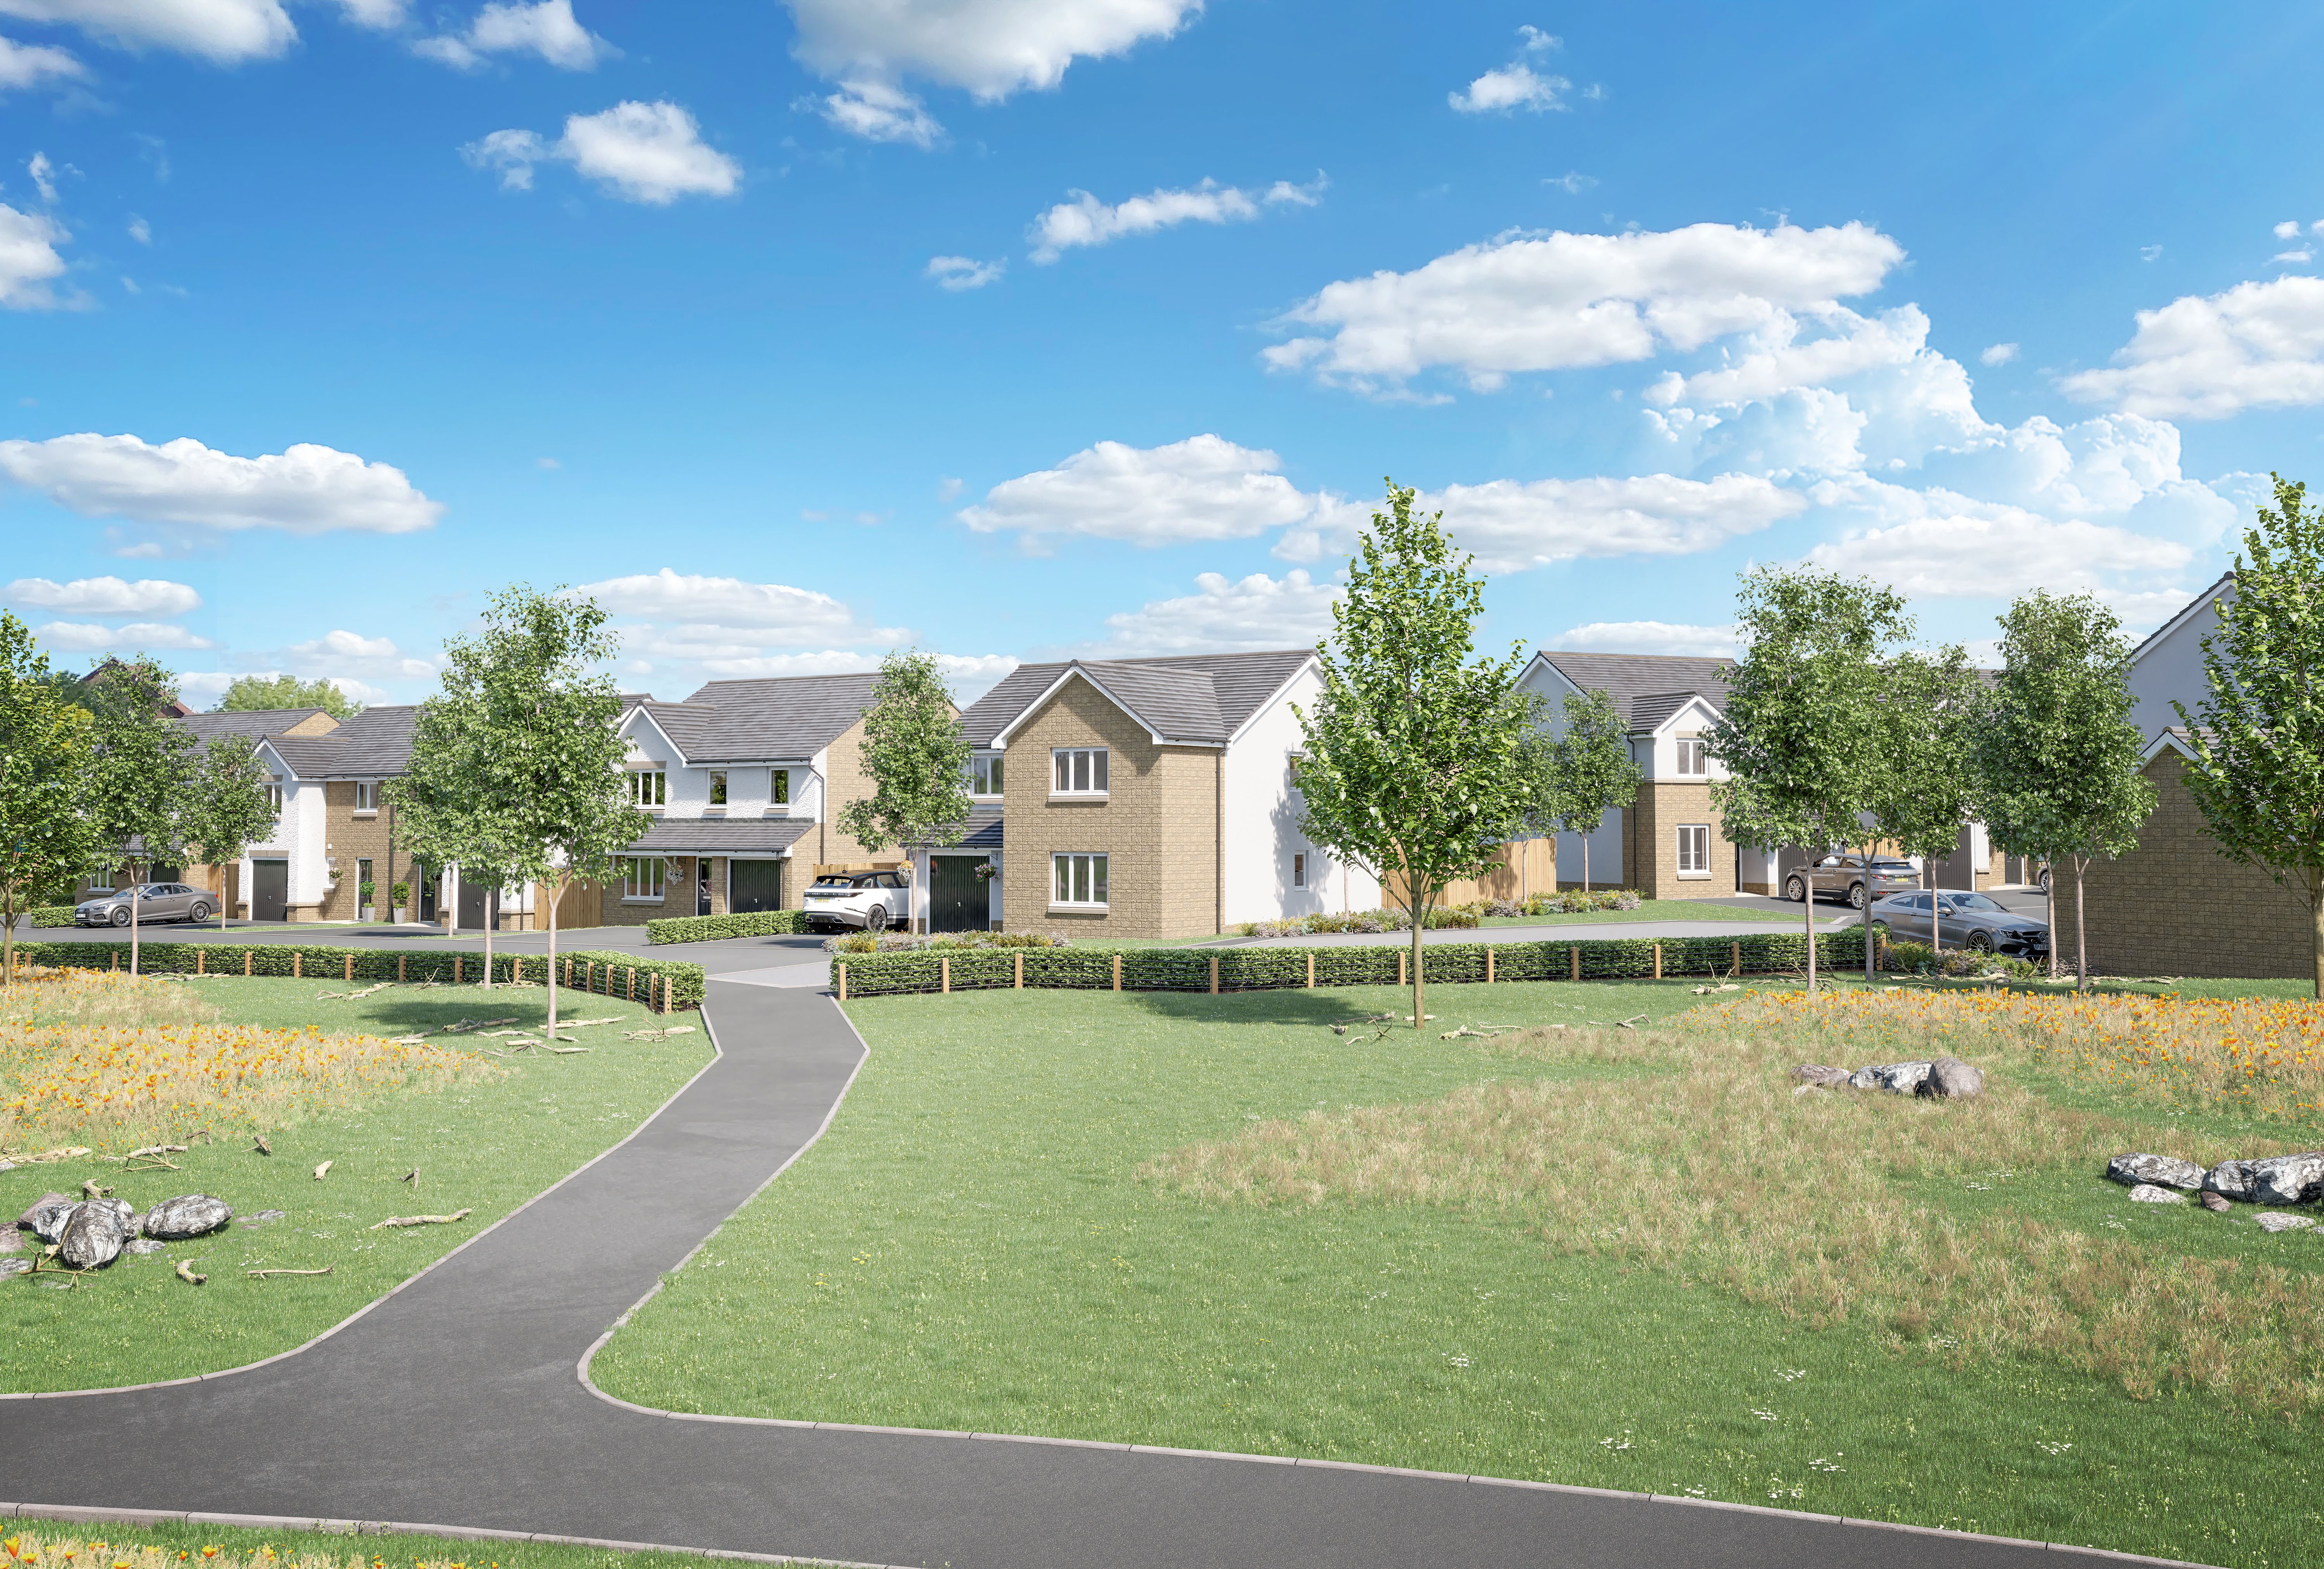 Taylor Wimpey secures detailed planning consent for Carnbroe development in Coatbridge area